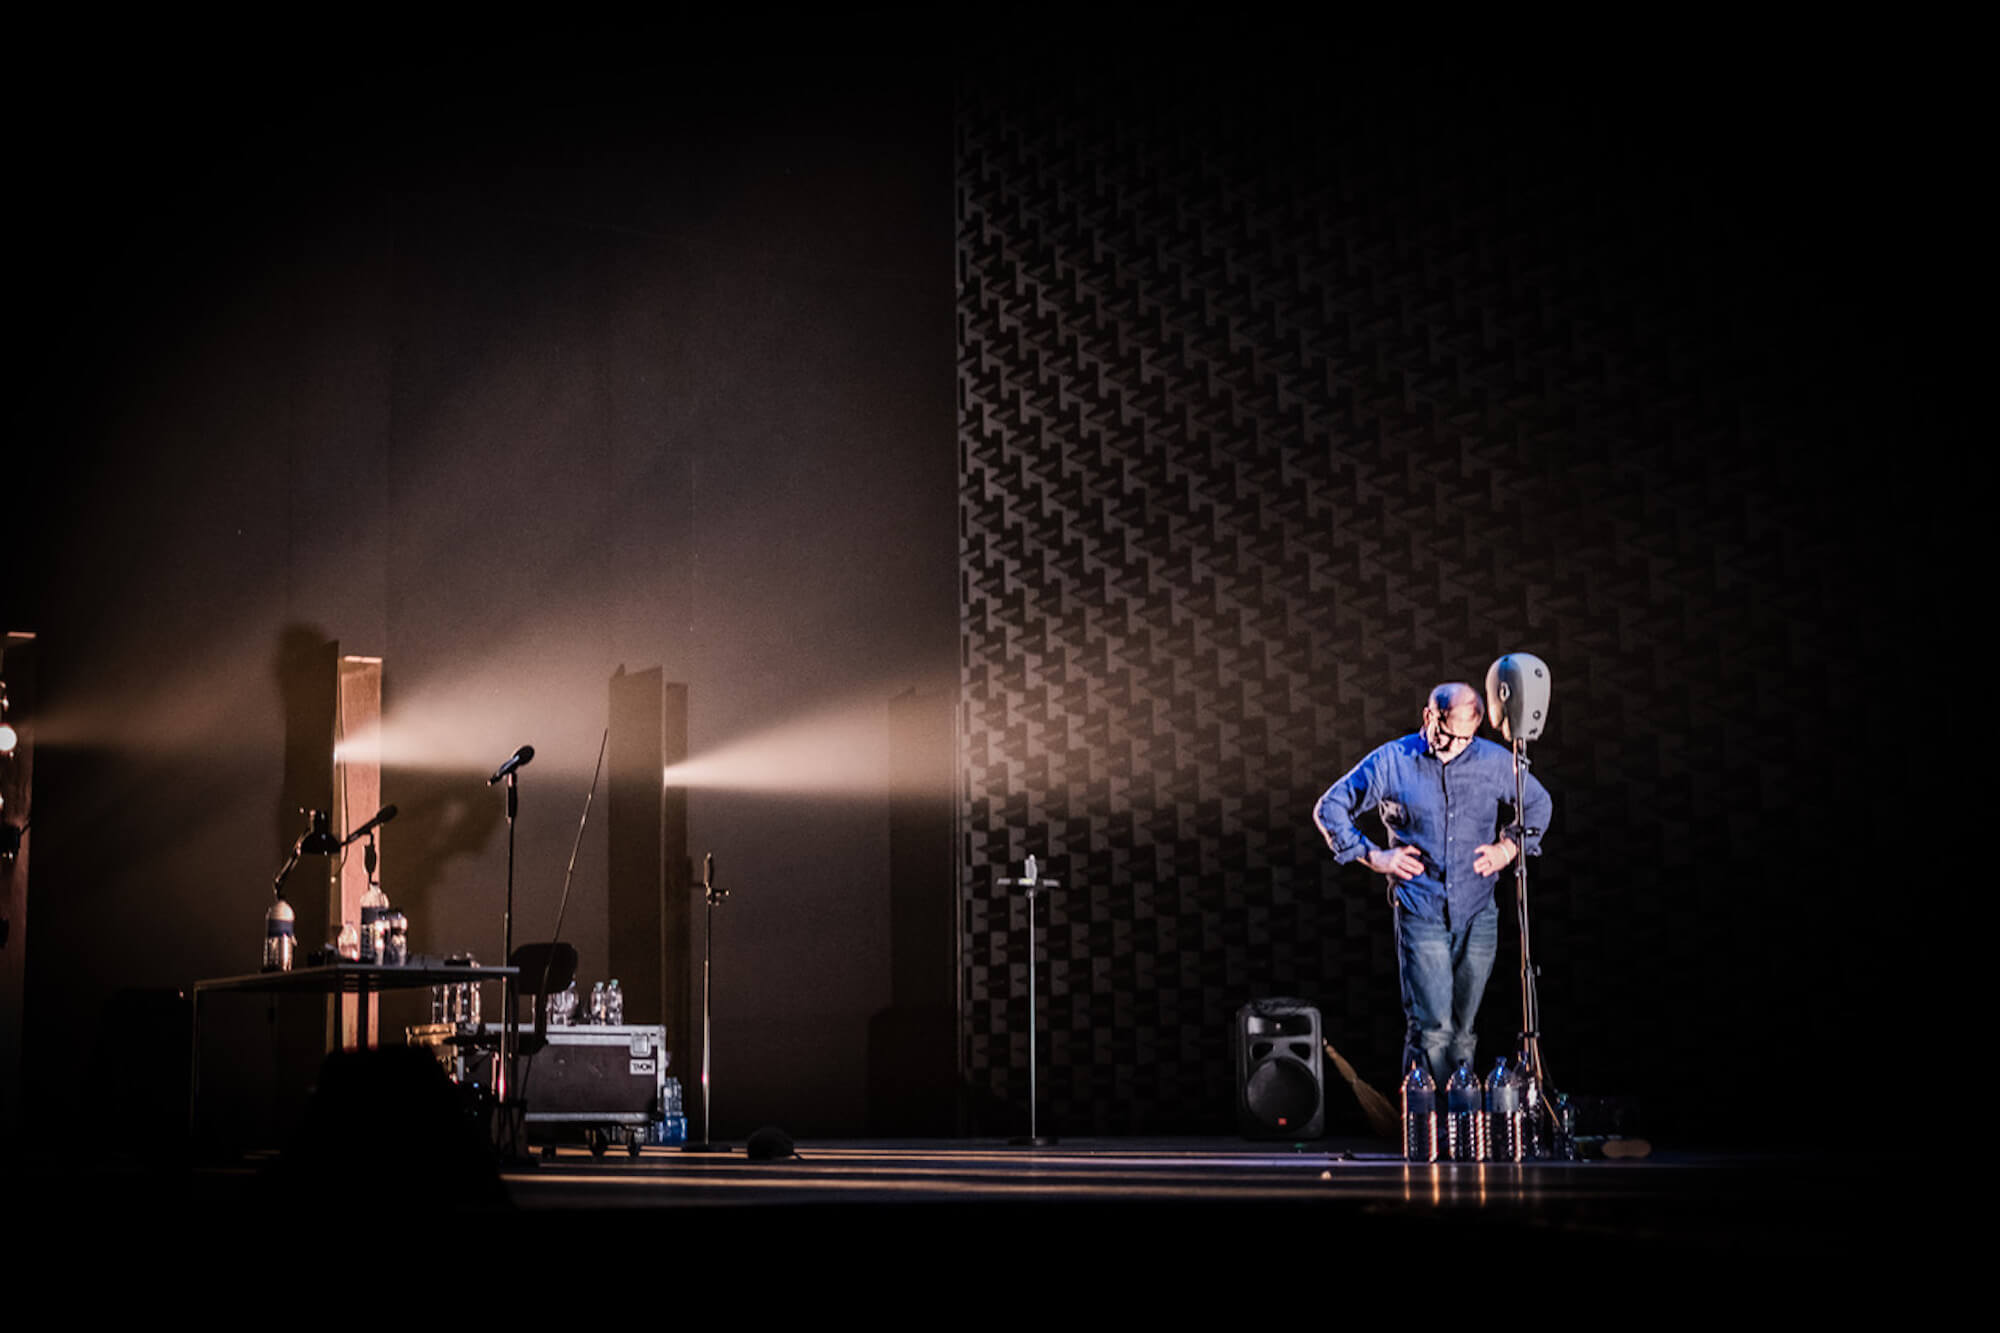 In a dark, black stage, with two single streams of light shining from the back, Simon McBurney stands looking down with his hands on his hips, while the stage is arrayed with many water bottles.